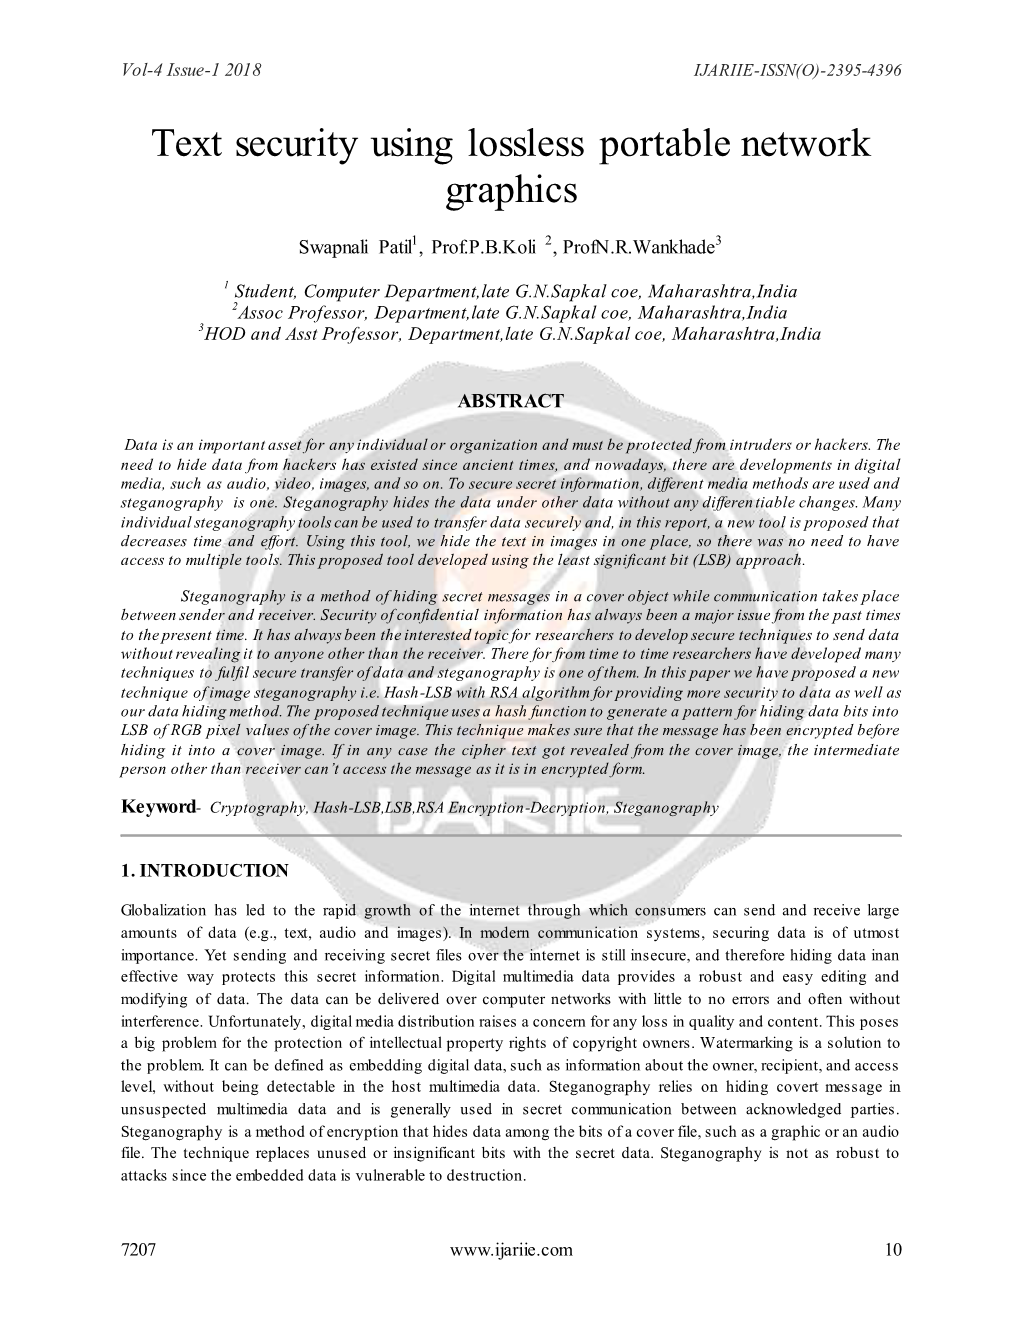 Text Security Using Lossless Portable Network Graphics